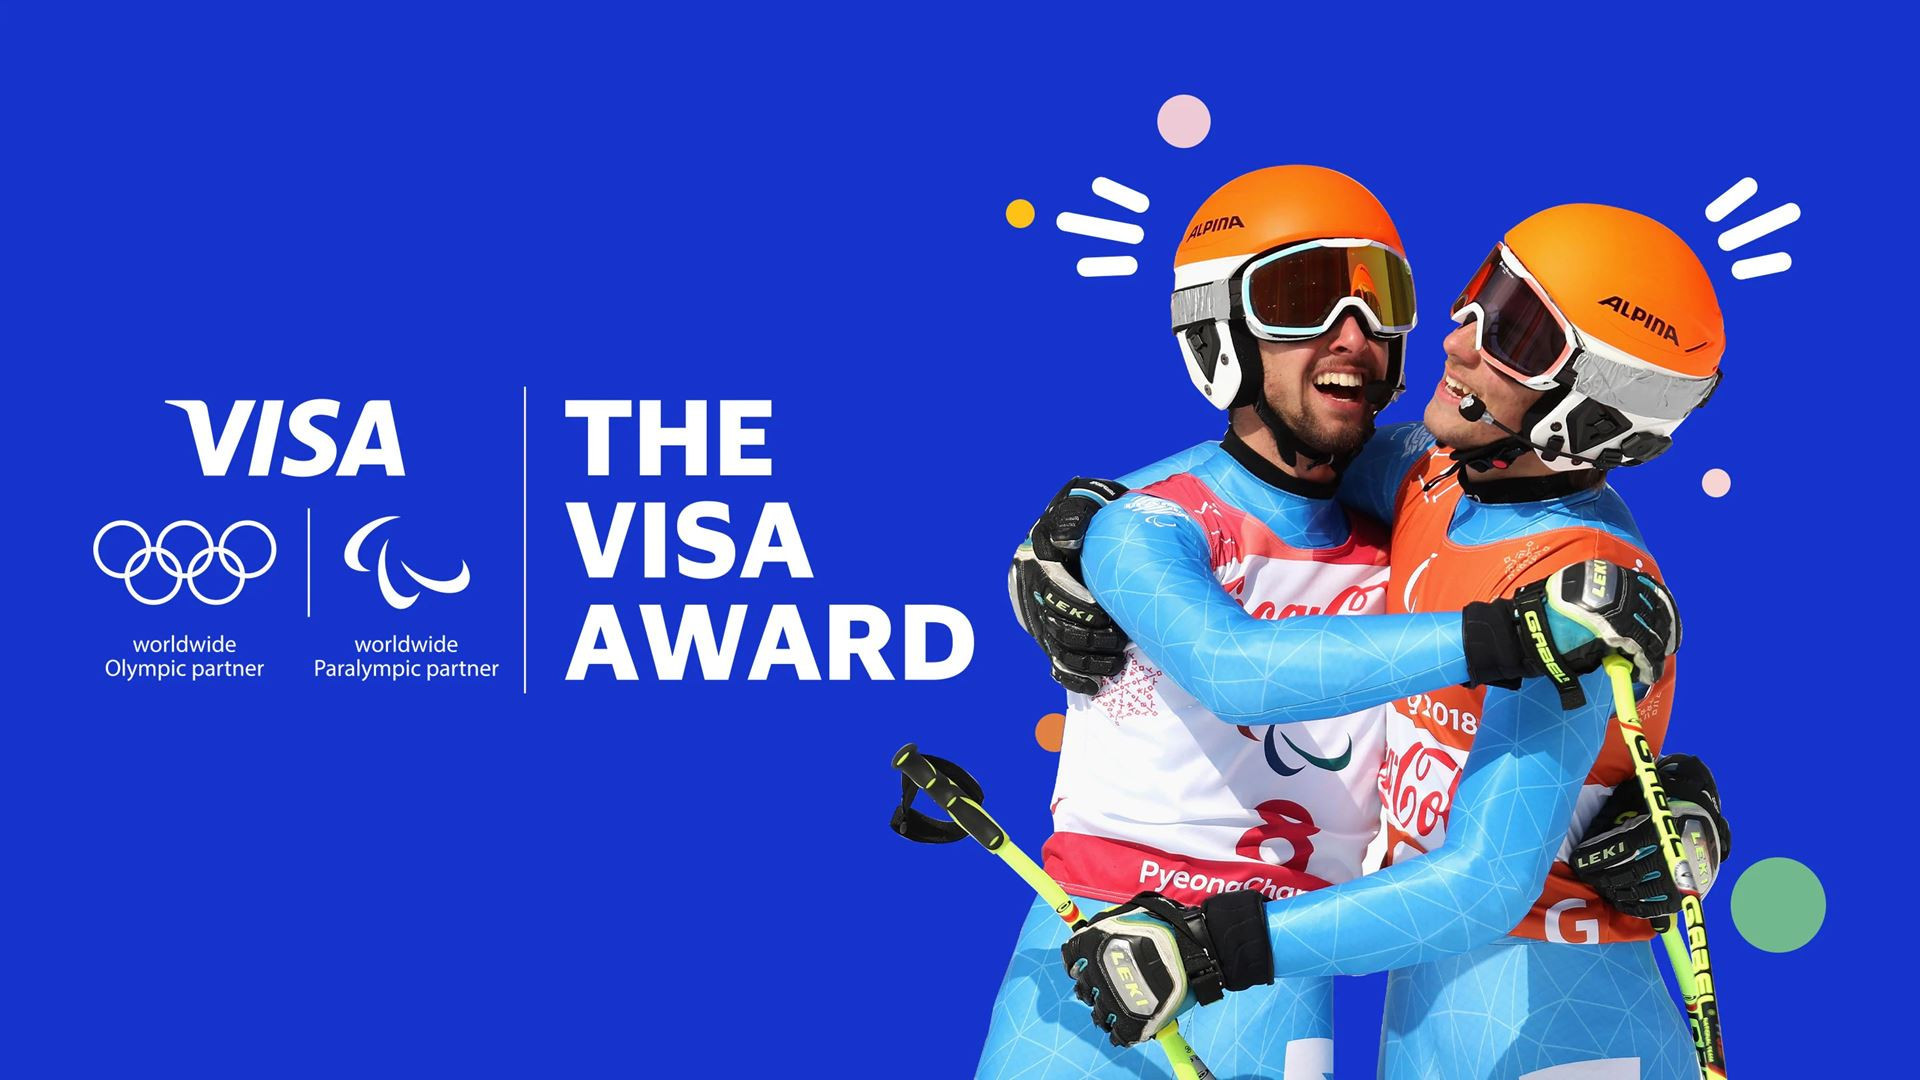 The Visa Award The Visa Award which recognises athletes who "best represent the Olympic and Paralympic values" has been launched at Beijing 2022 ©IOC